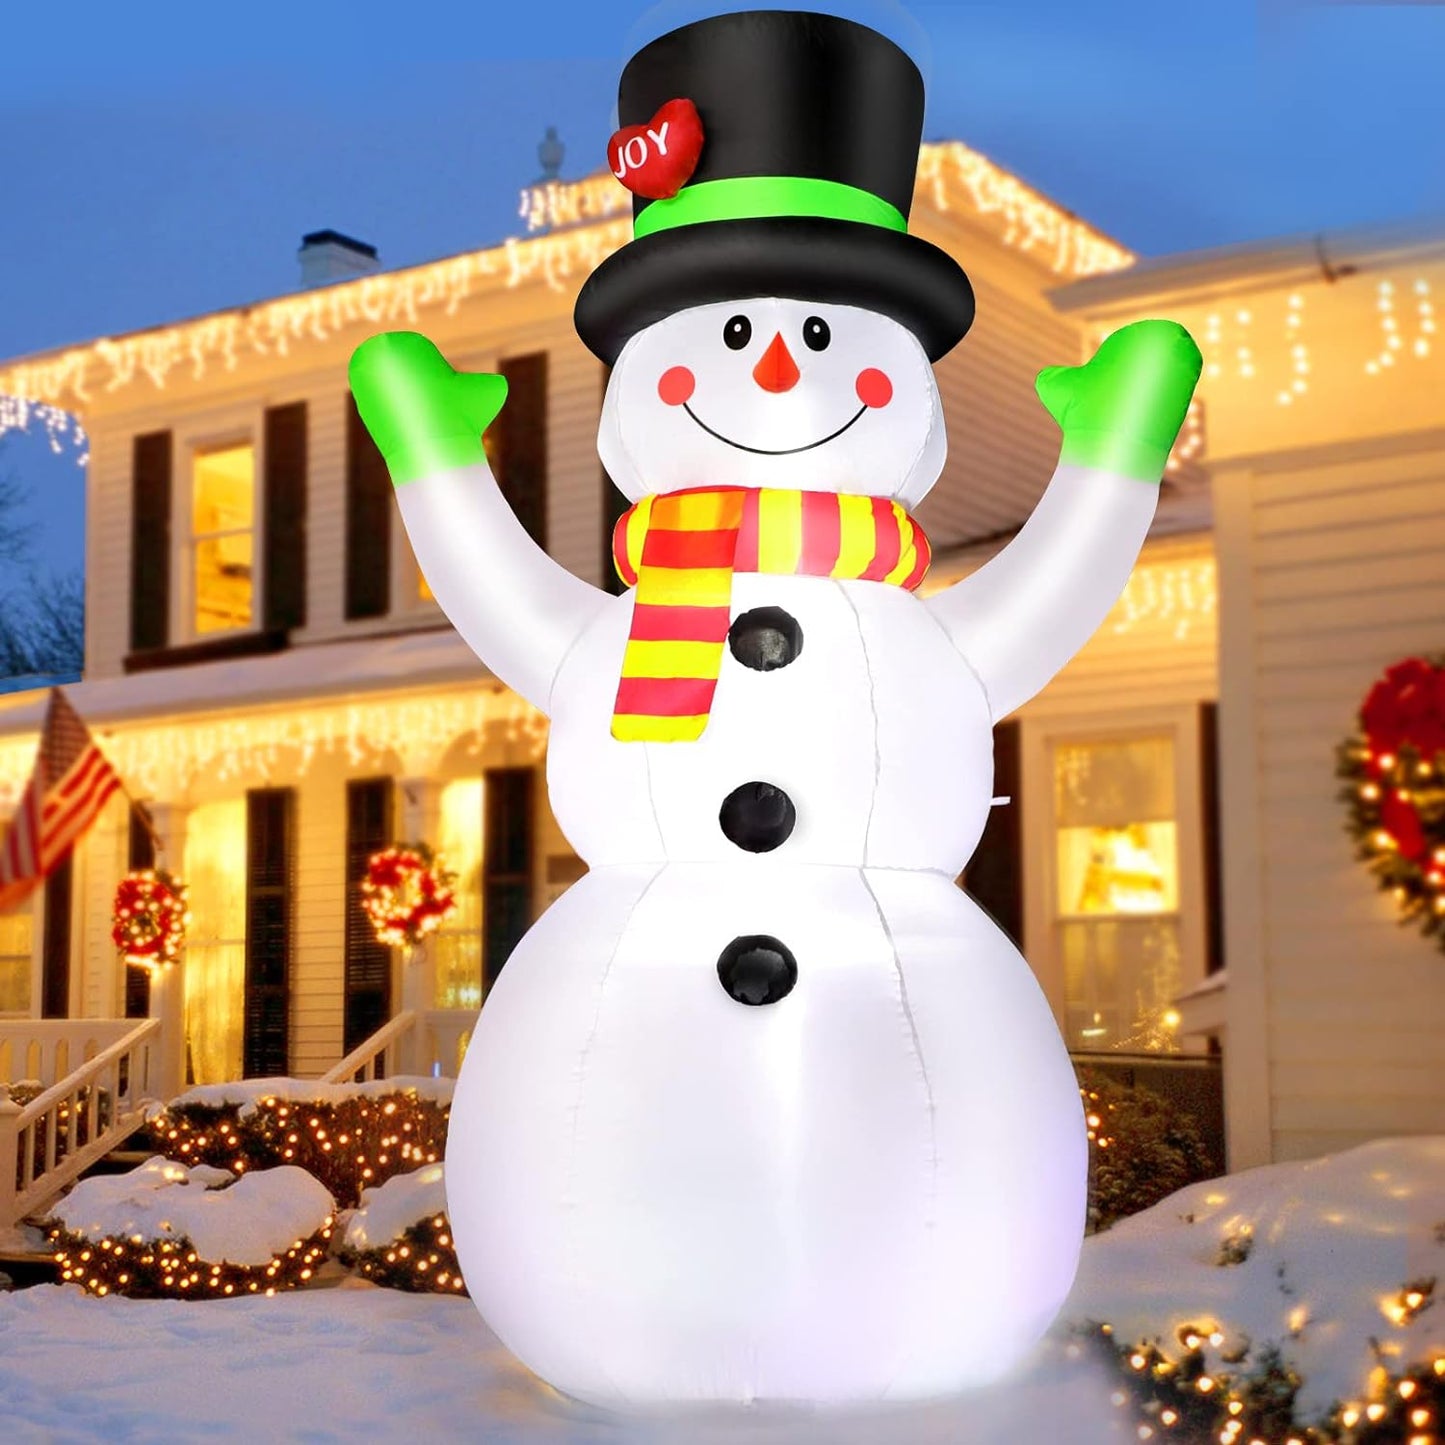 4 FT Christmas Inflatables Snowman Outdoor Decorations Blow Up Yard Decoration with LED Lights Built-in for Xmas Holiday Party Indoor